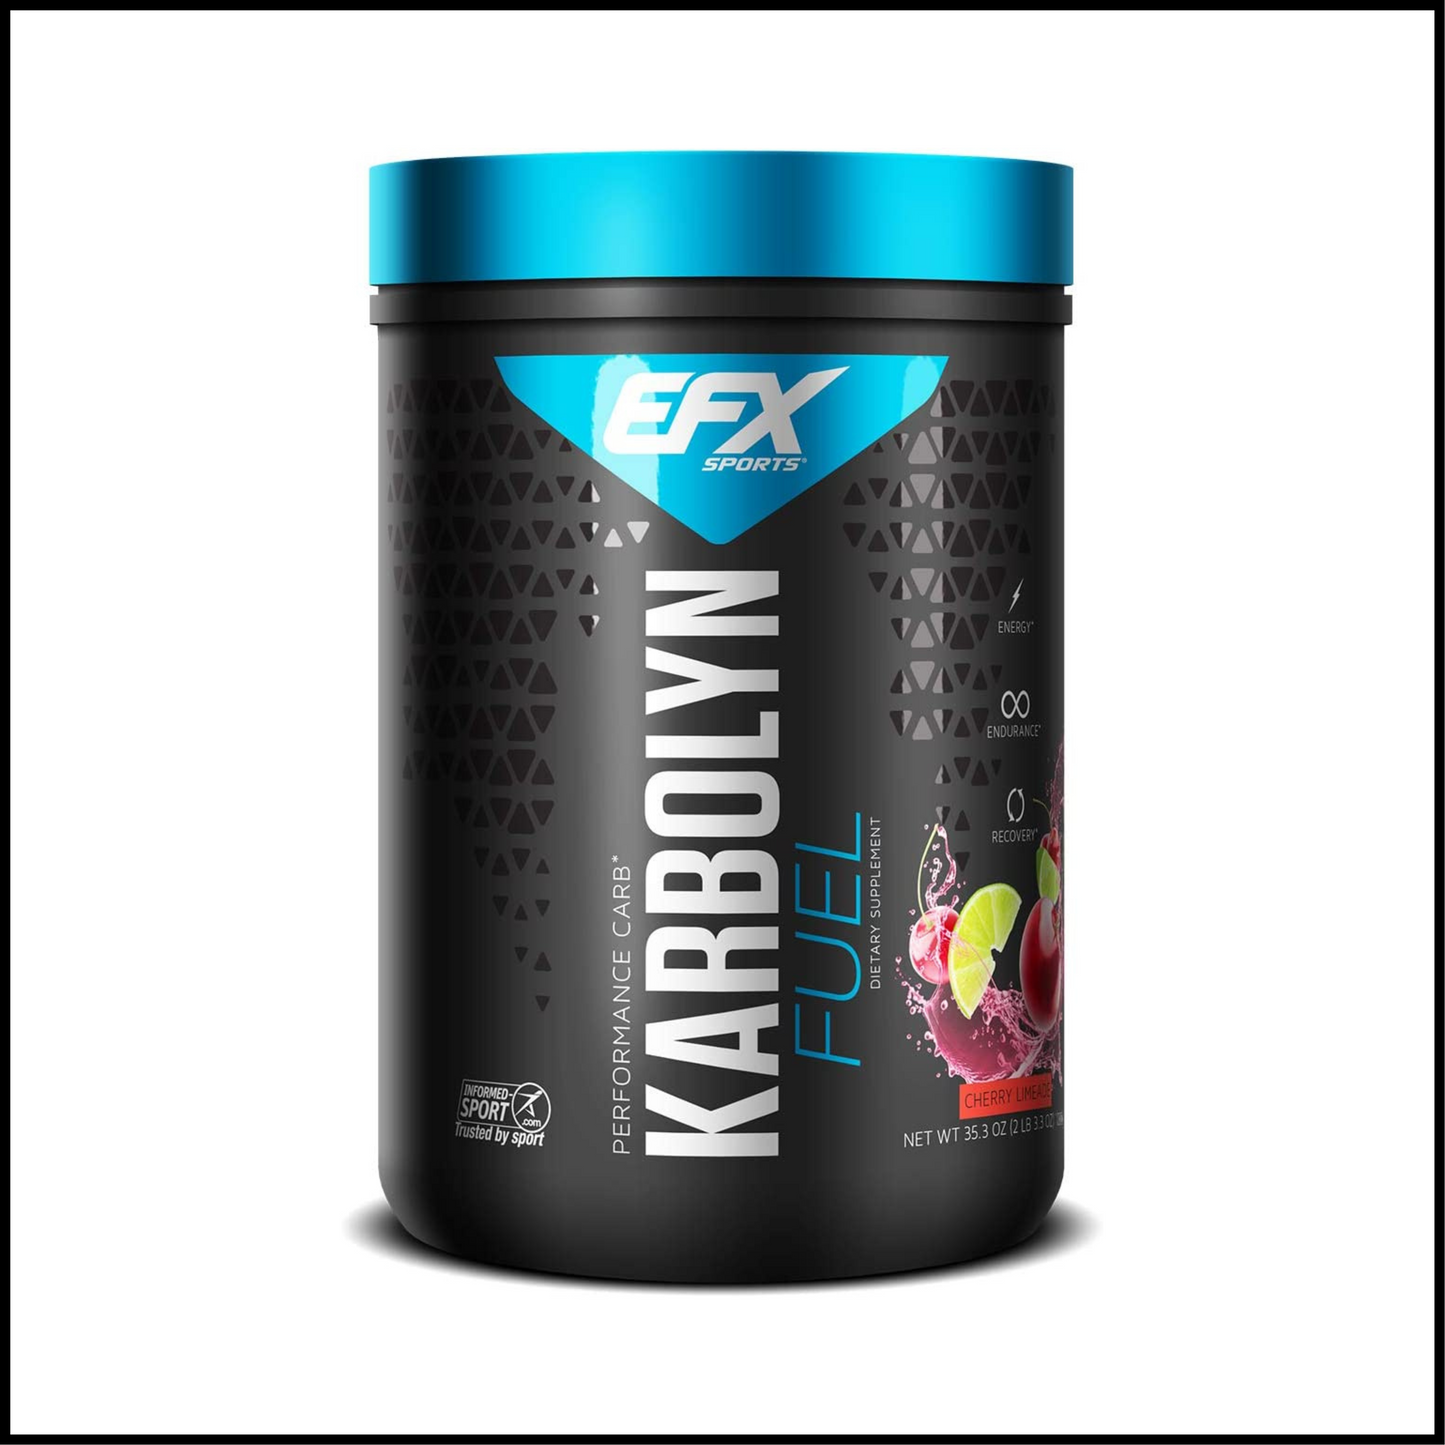 Karbolyn Fuel Pre Intra Post Workout Carbohydrate Supplement Powder Cherry Limeade | 2 LB 3.3 OZ